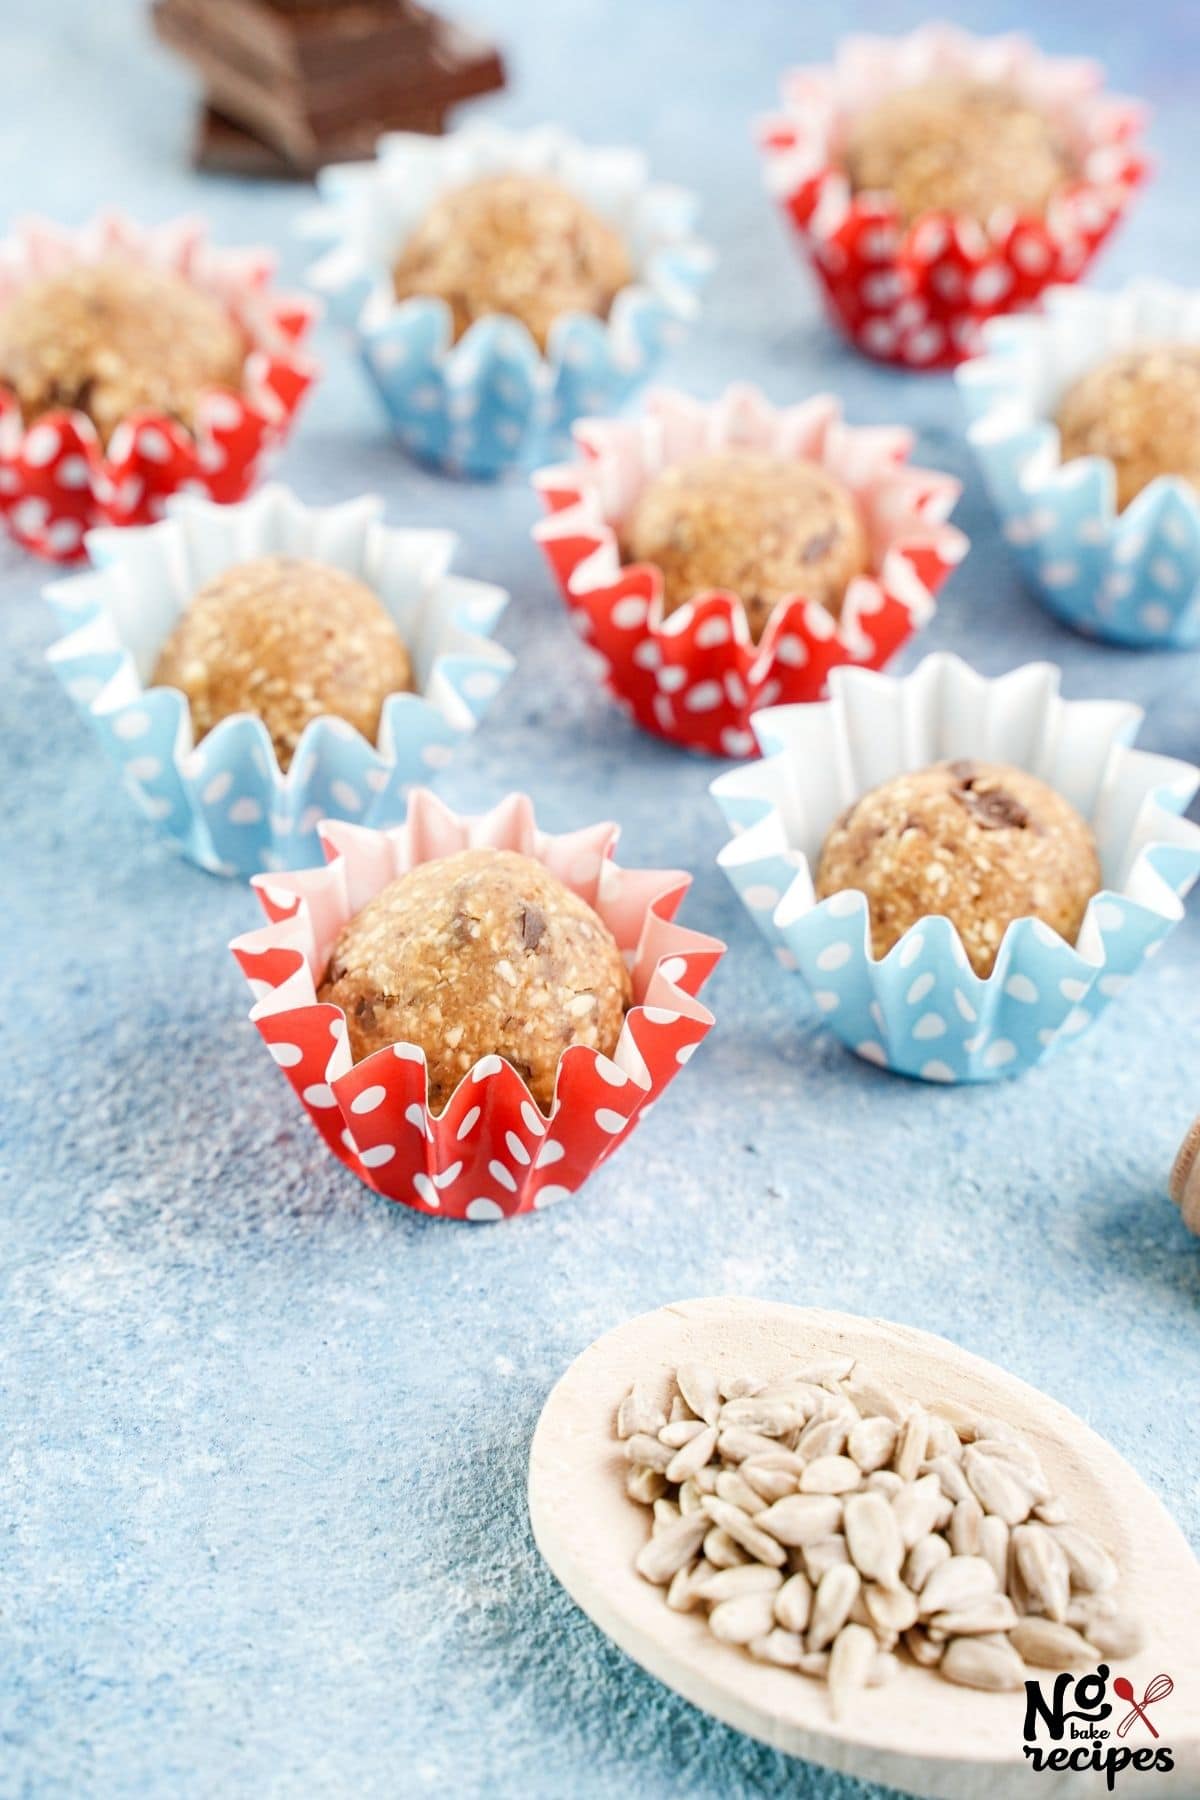 vegan protein balls in wrappers on blue table by sunflower seeds